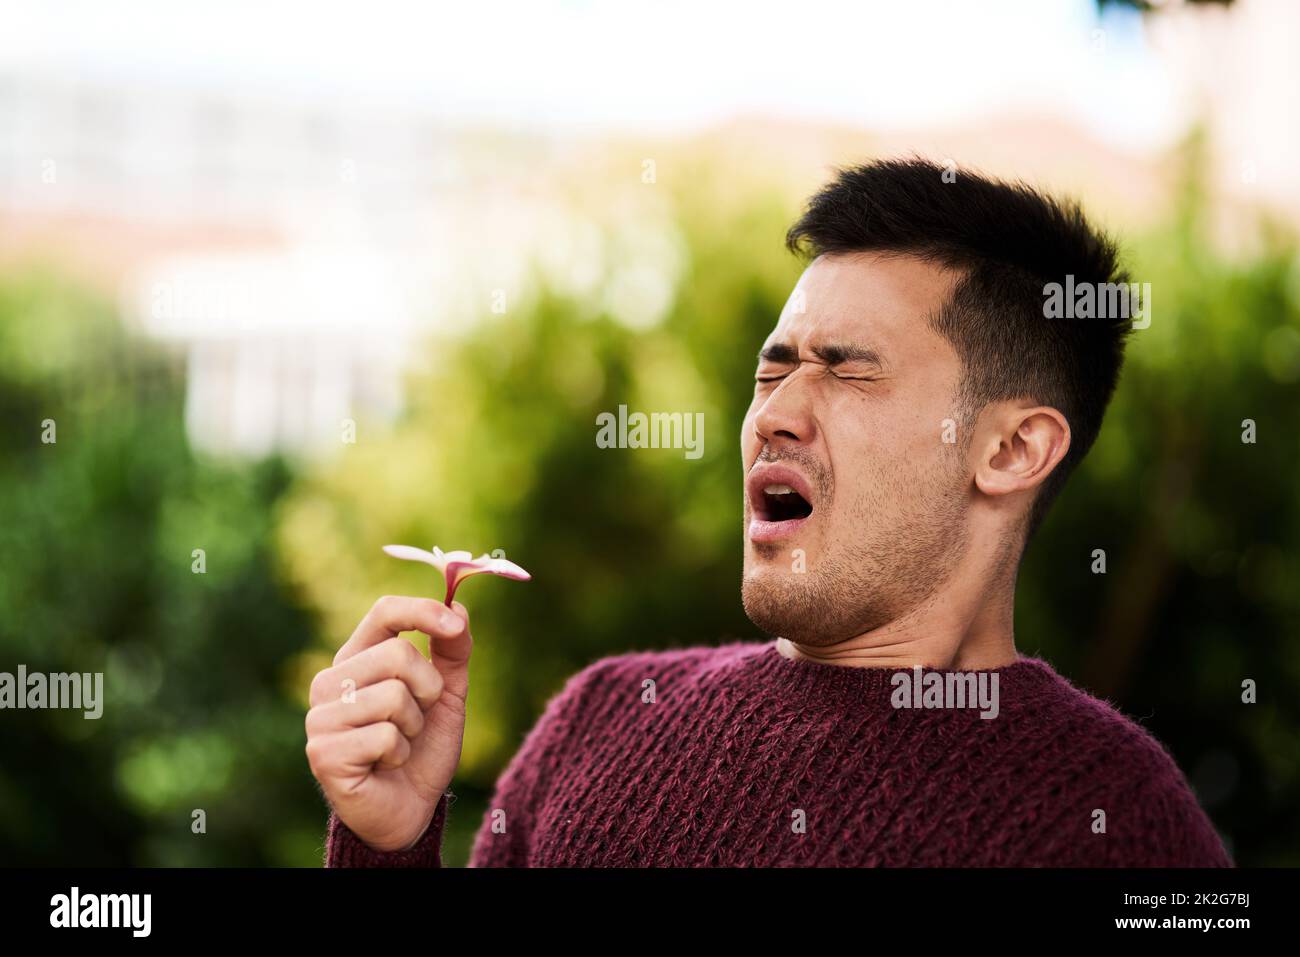 Hayfever season. Cropped shot of a young man sneezing after smelling a flower. Stock Photo